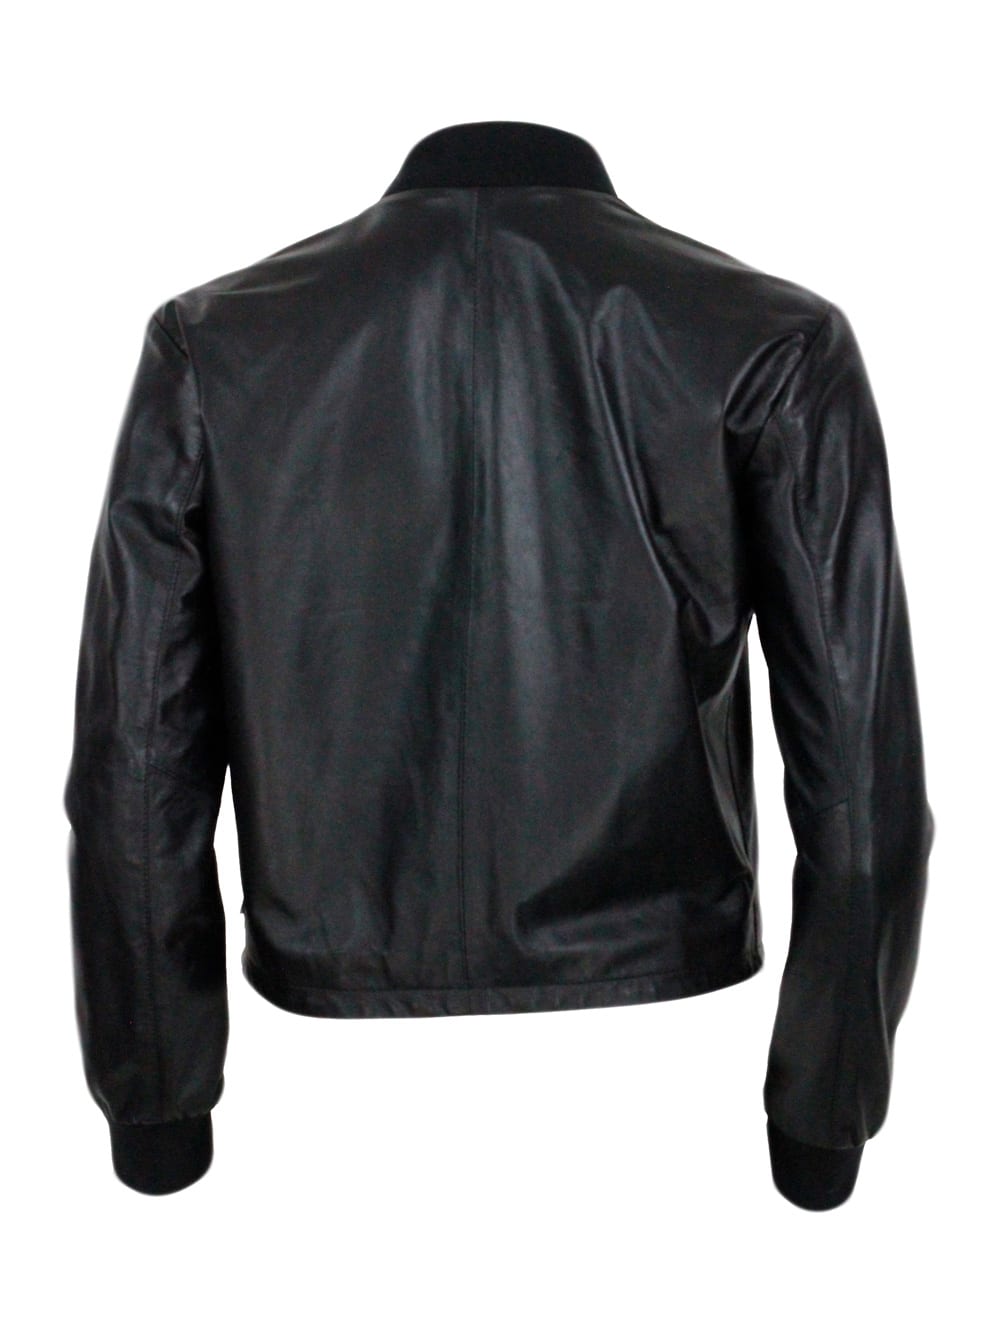 Shop Add Jacket In Soft And Real Lambskin With College Collar And Zip Closure. Stretch Knit Collar And Cuffs In Black